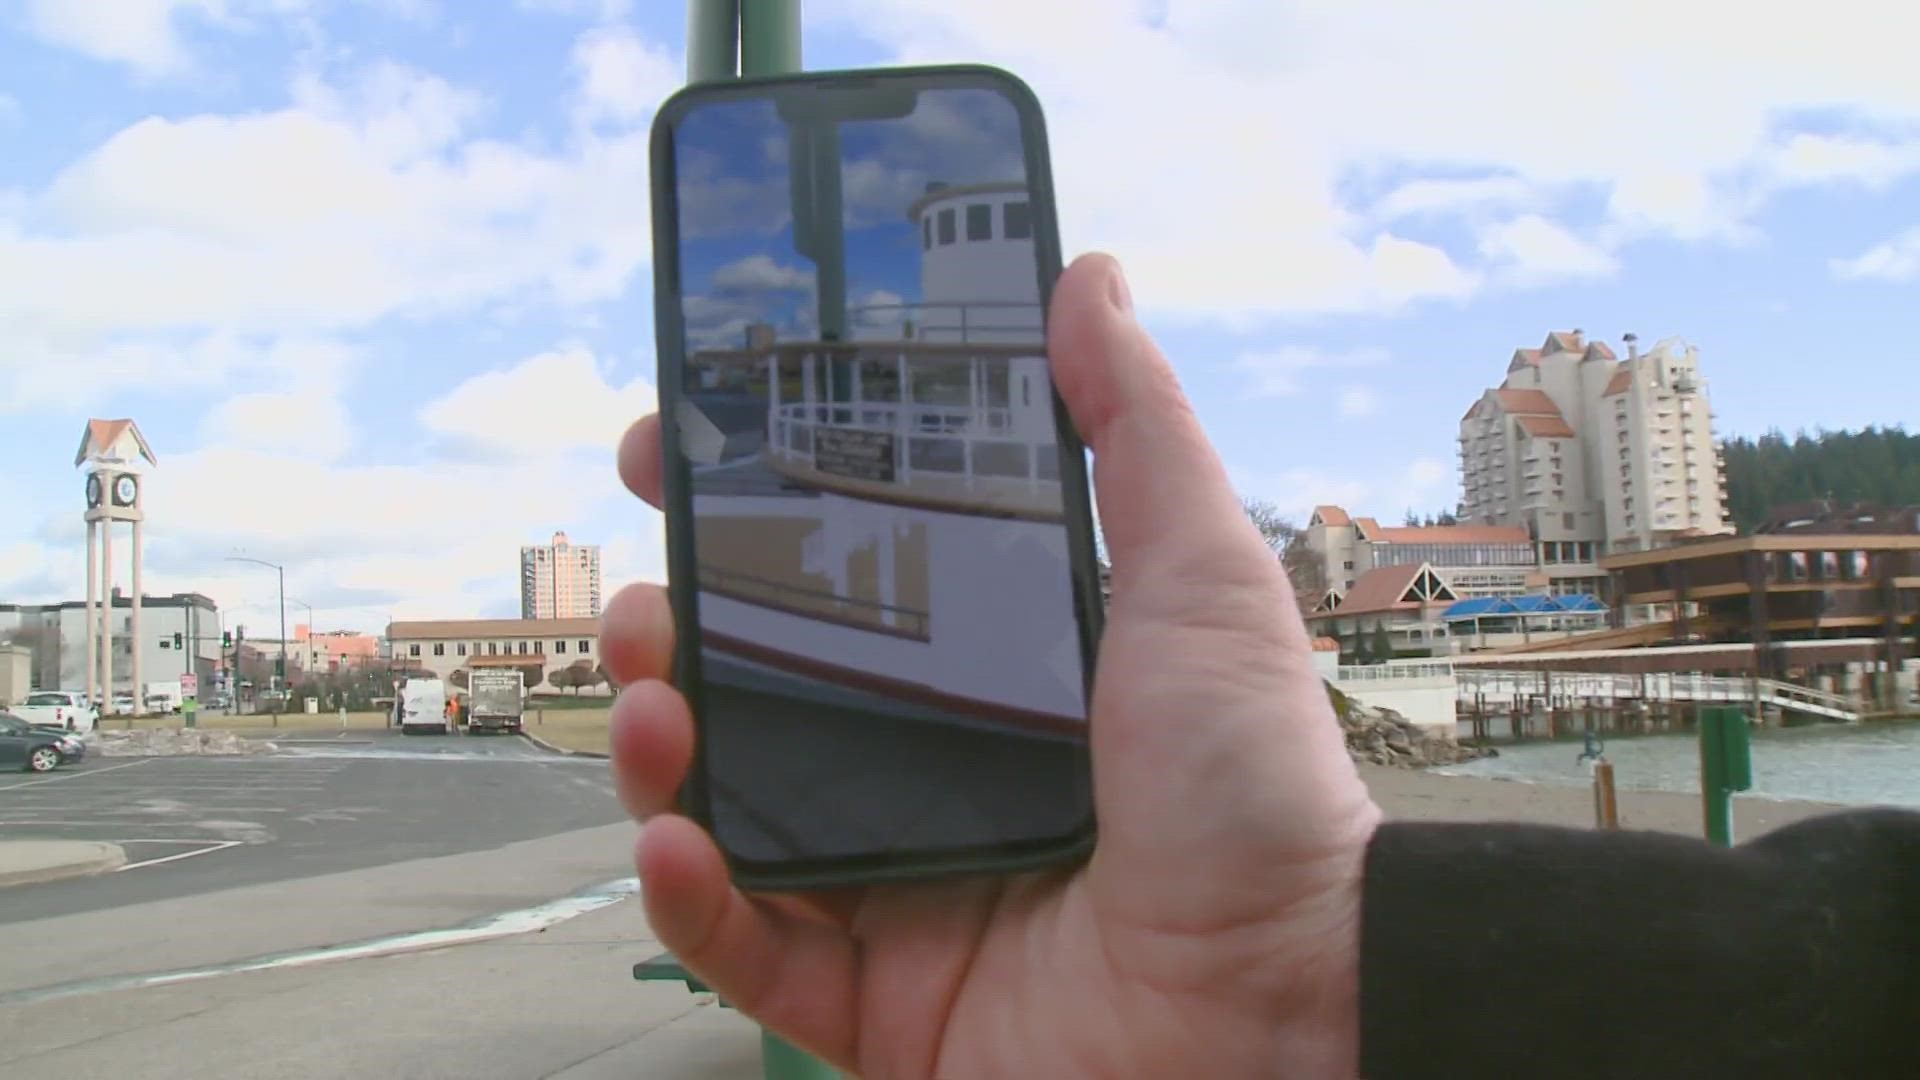 KREM 2's Dave Somers sat down with the man who's trying to bring history to life through the Historik app.